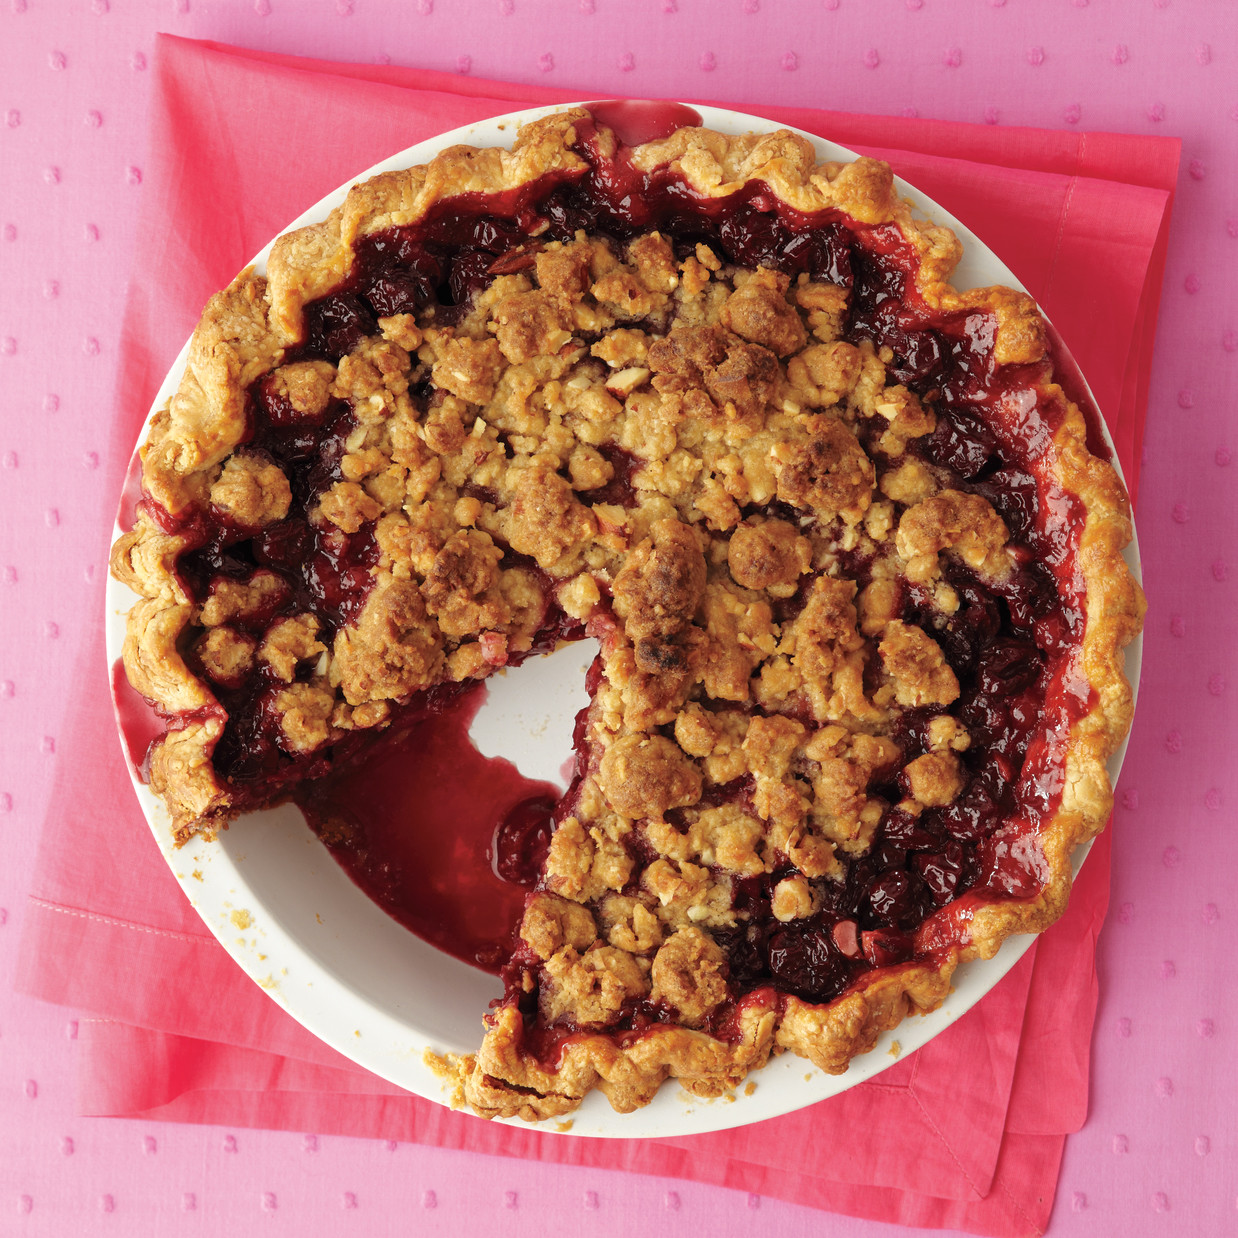 Cherry Pie with Almond Crumble